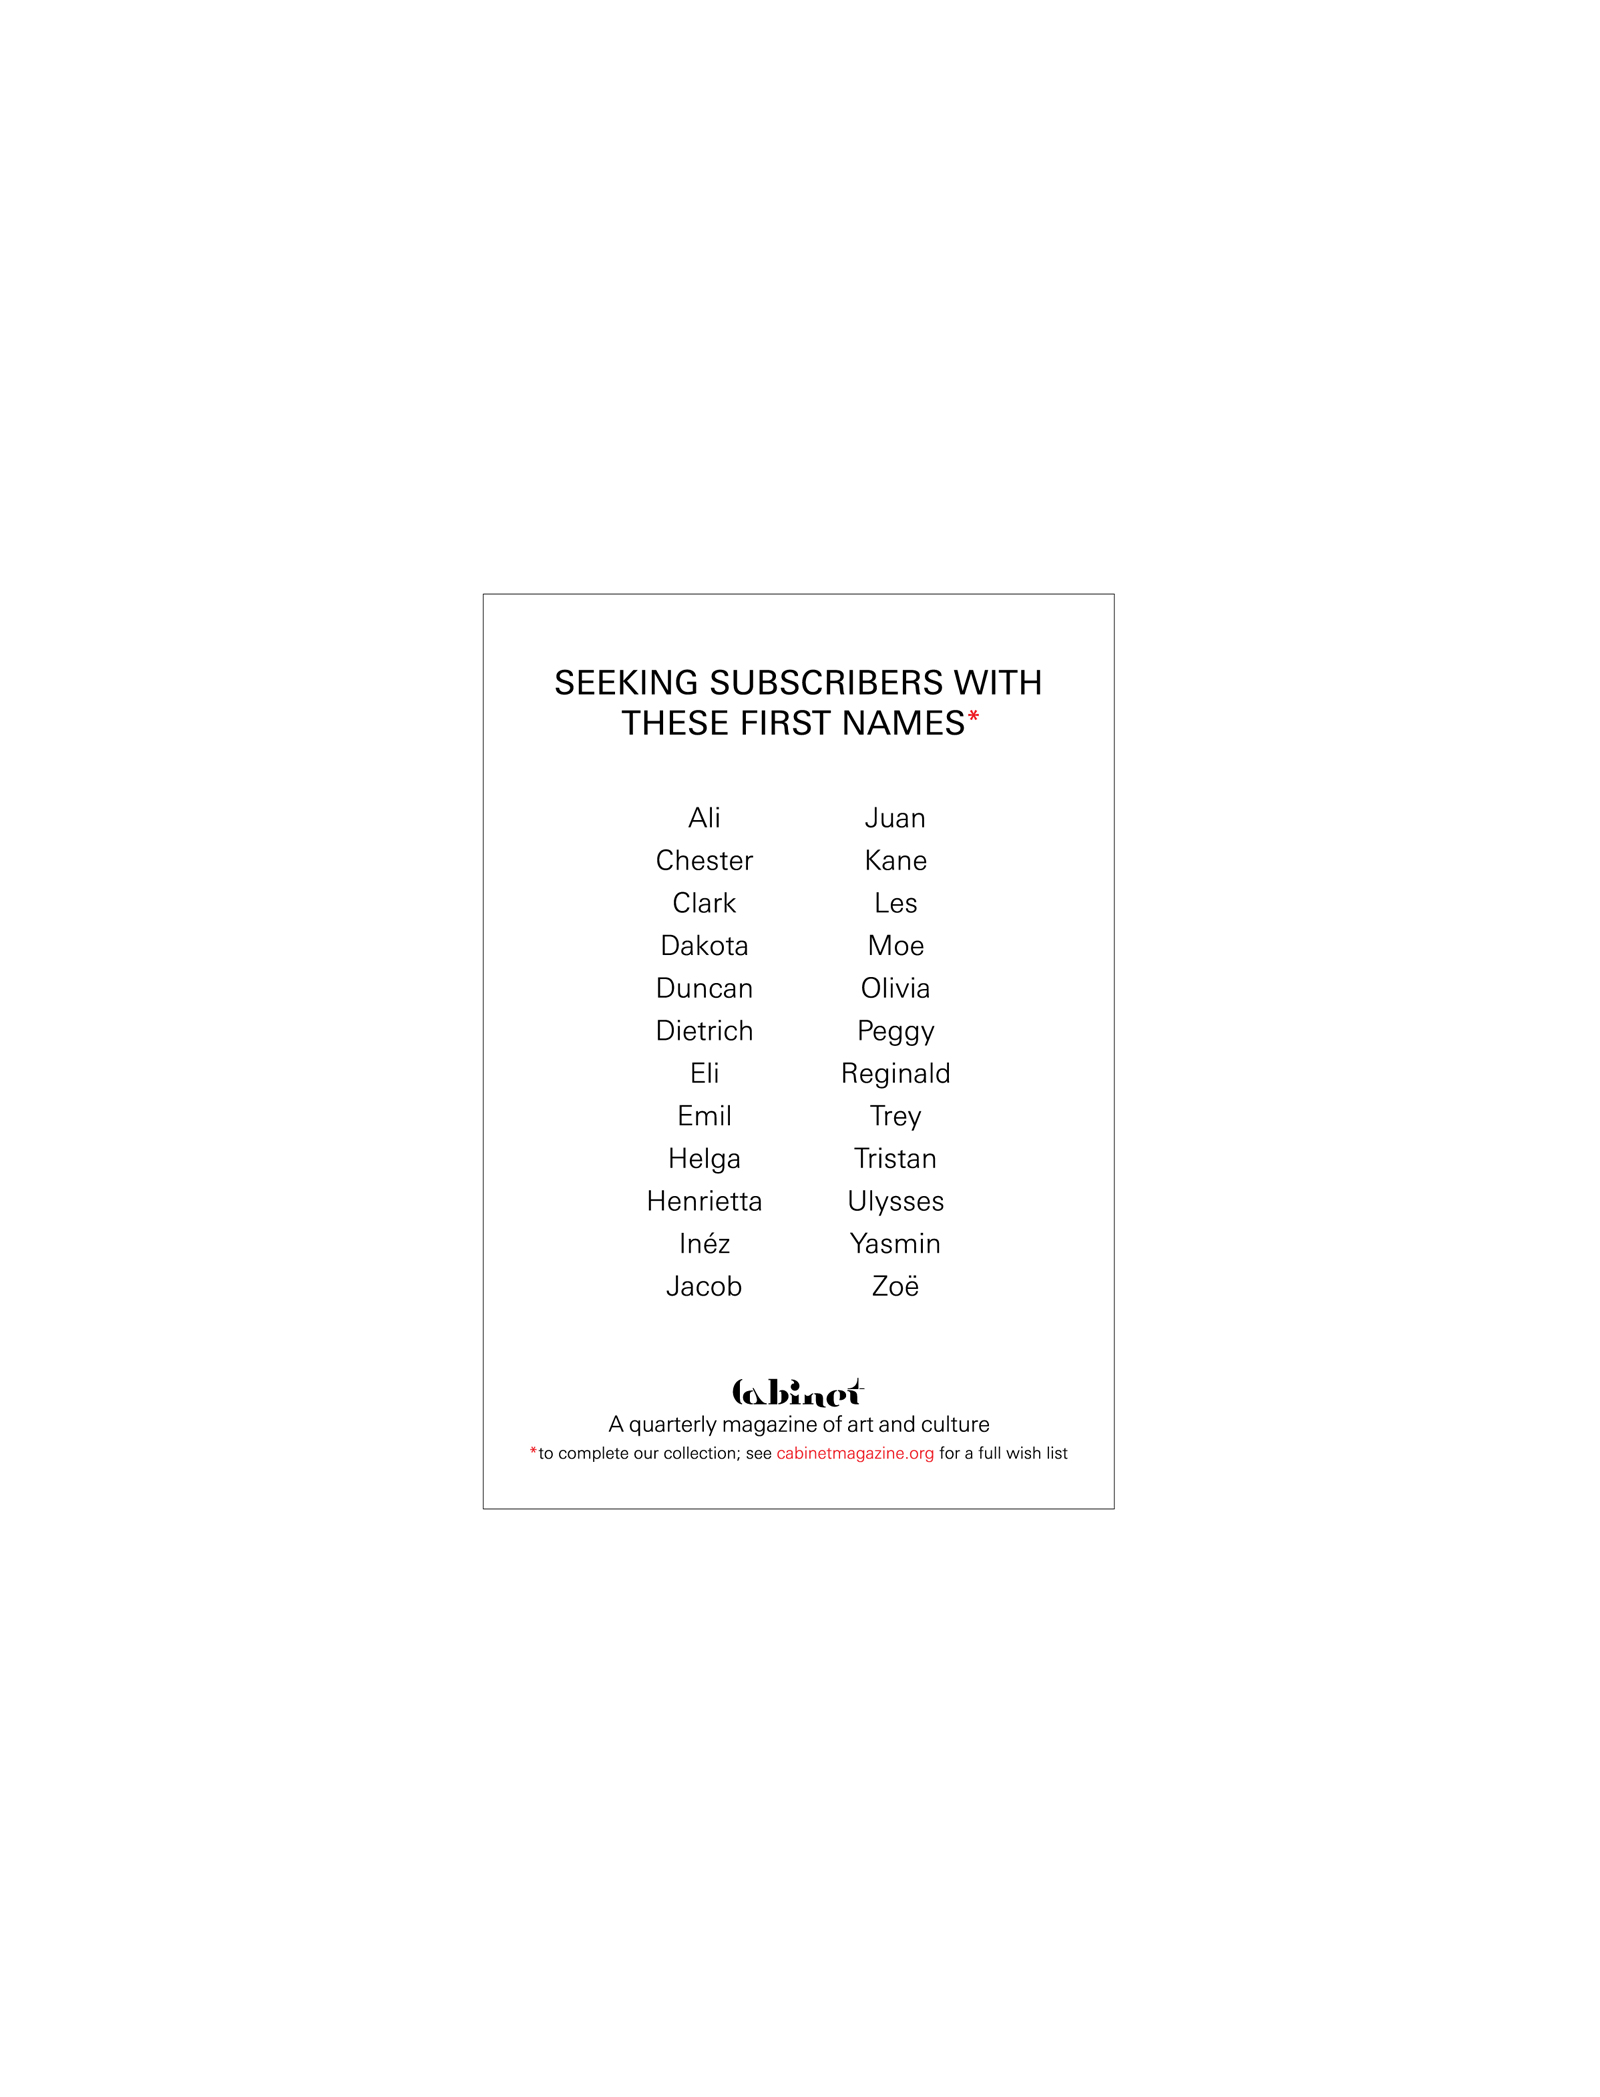 A list of first names missing from Cabinet’s roster of subscribers at the time issue 10 went to print. The announcement asks that readers with matching first names consult the magazine’s website to see the favorable rates at which they can subscribe.